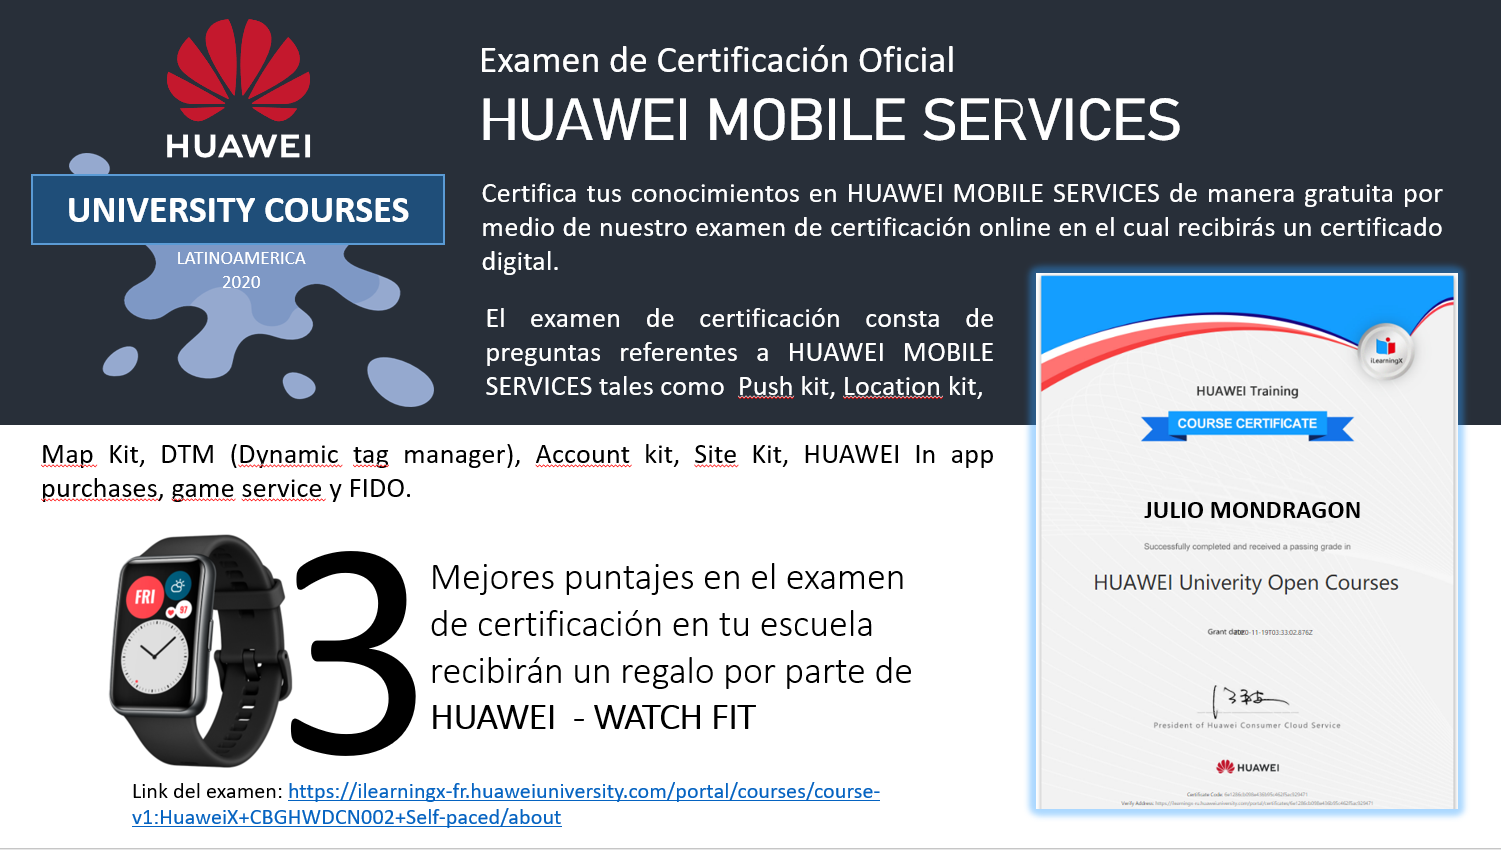 HUAWEI MOBILE SERVICES